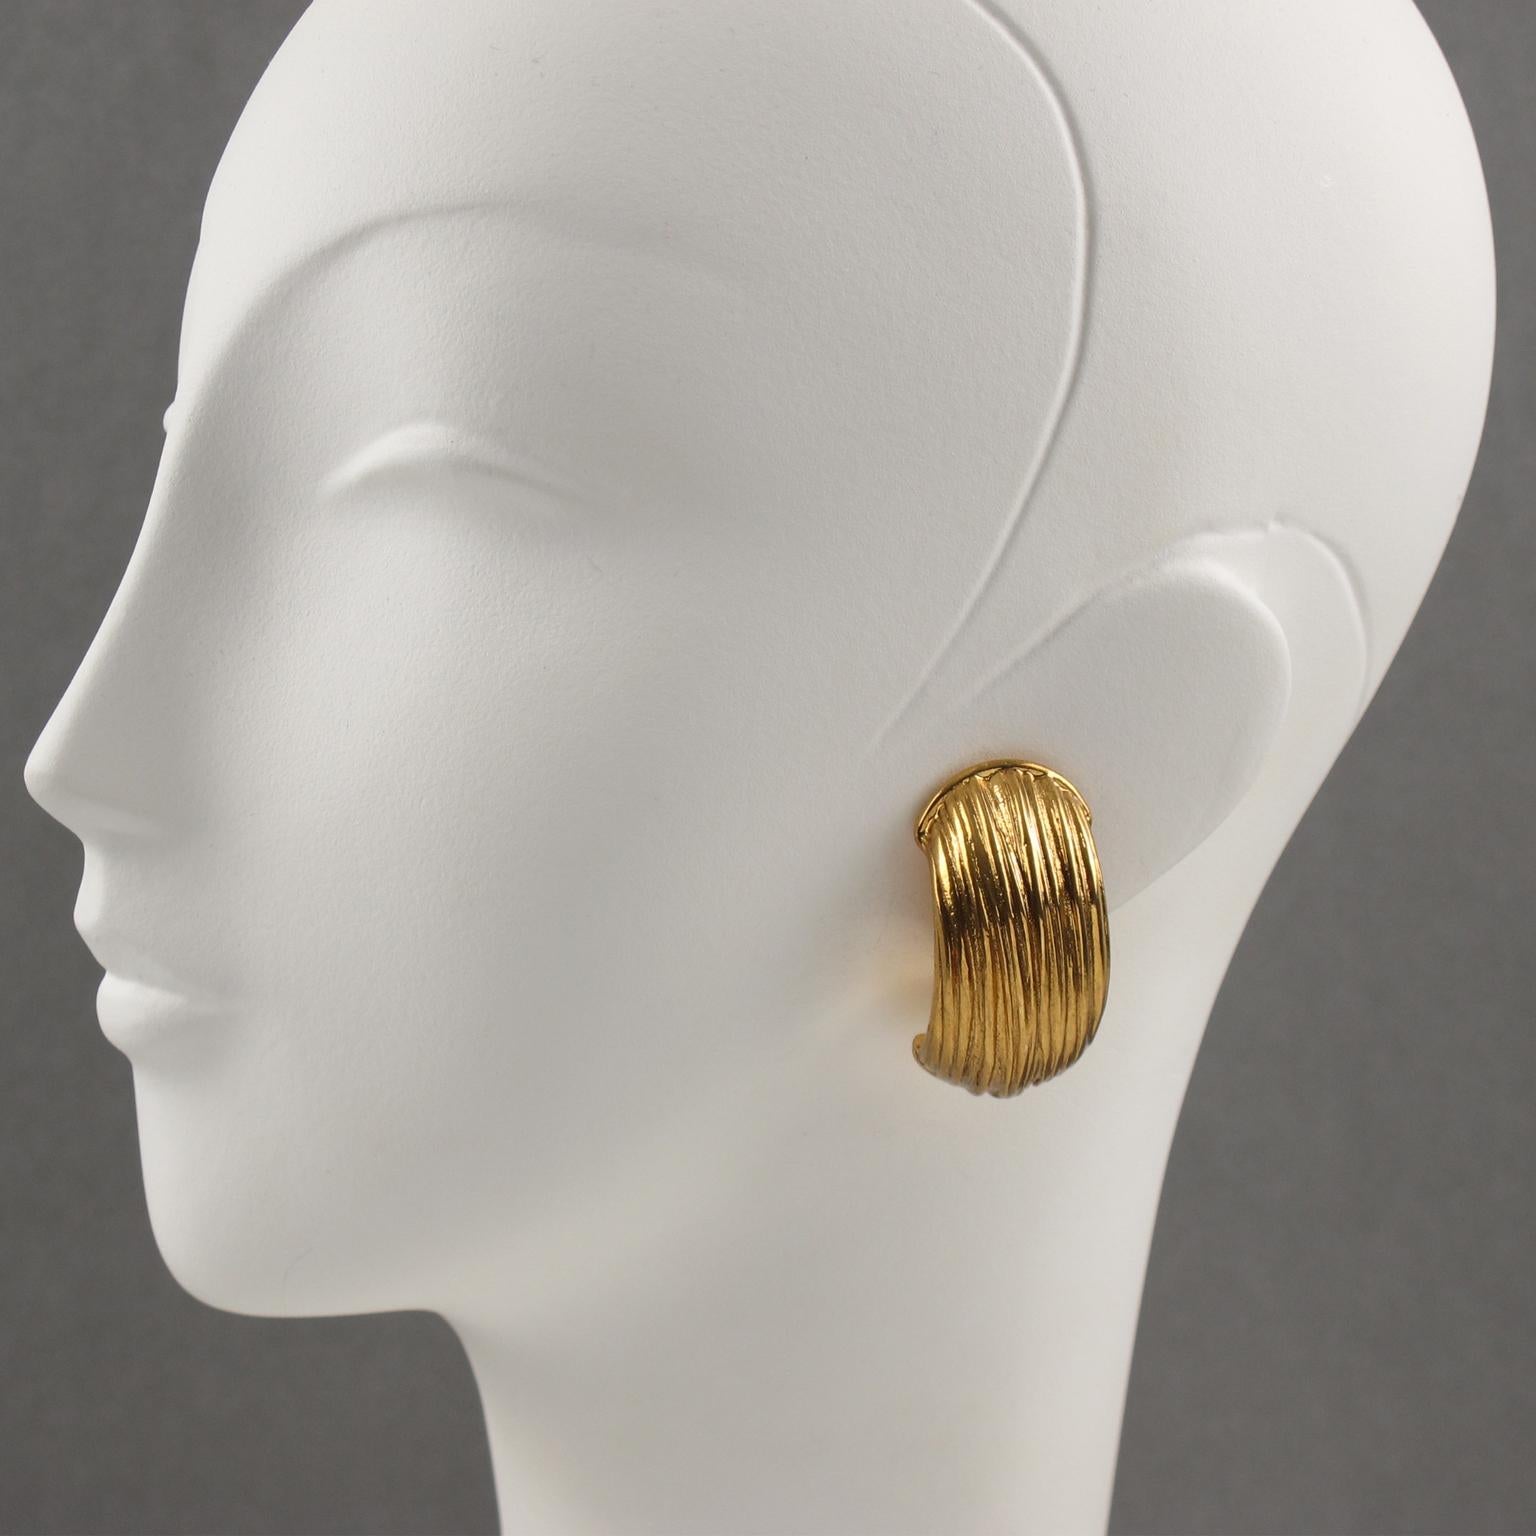 Lovely Yves Saint Laurent YSL Paris signed clip-on earrings. Features a dimensional hoop shape with gilt metal all carved and textured. Signed with 